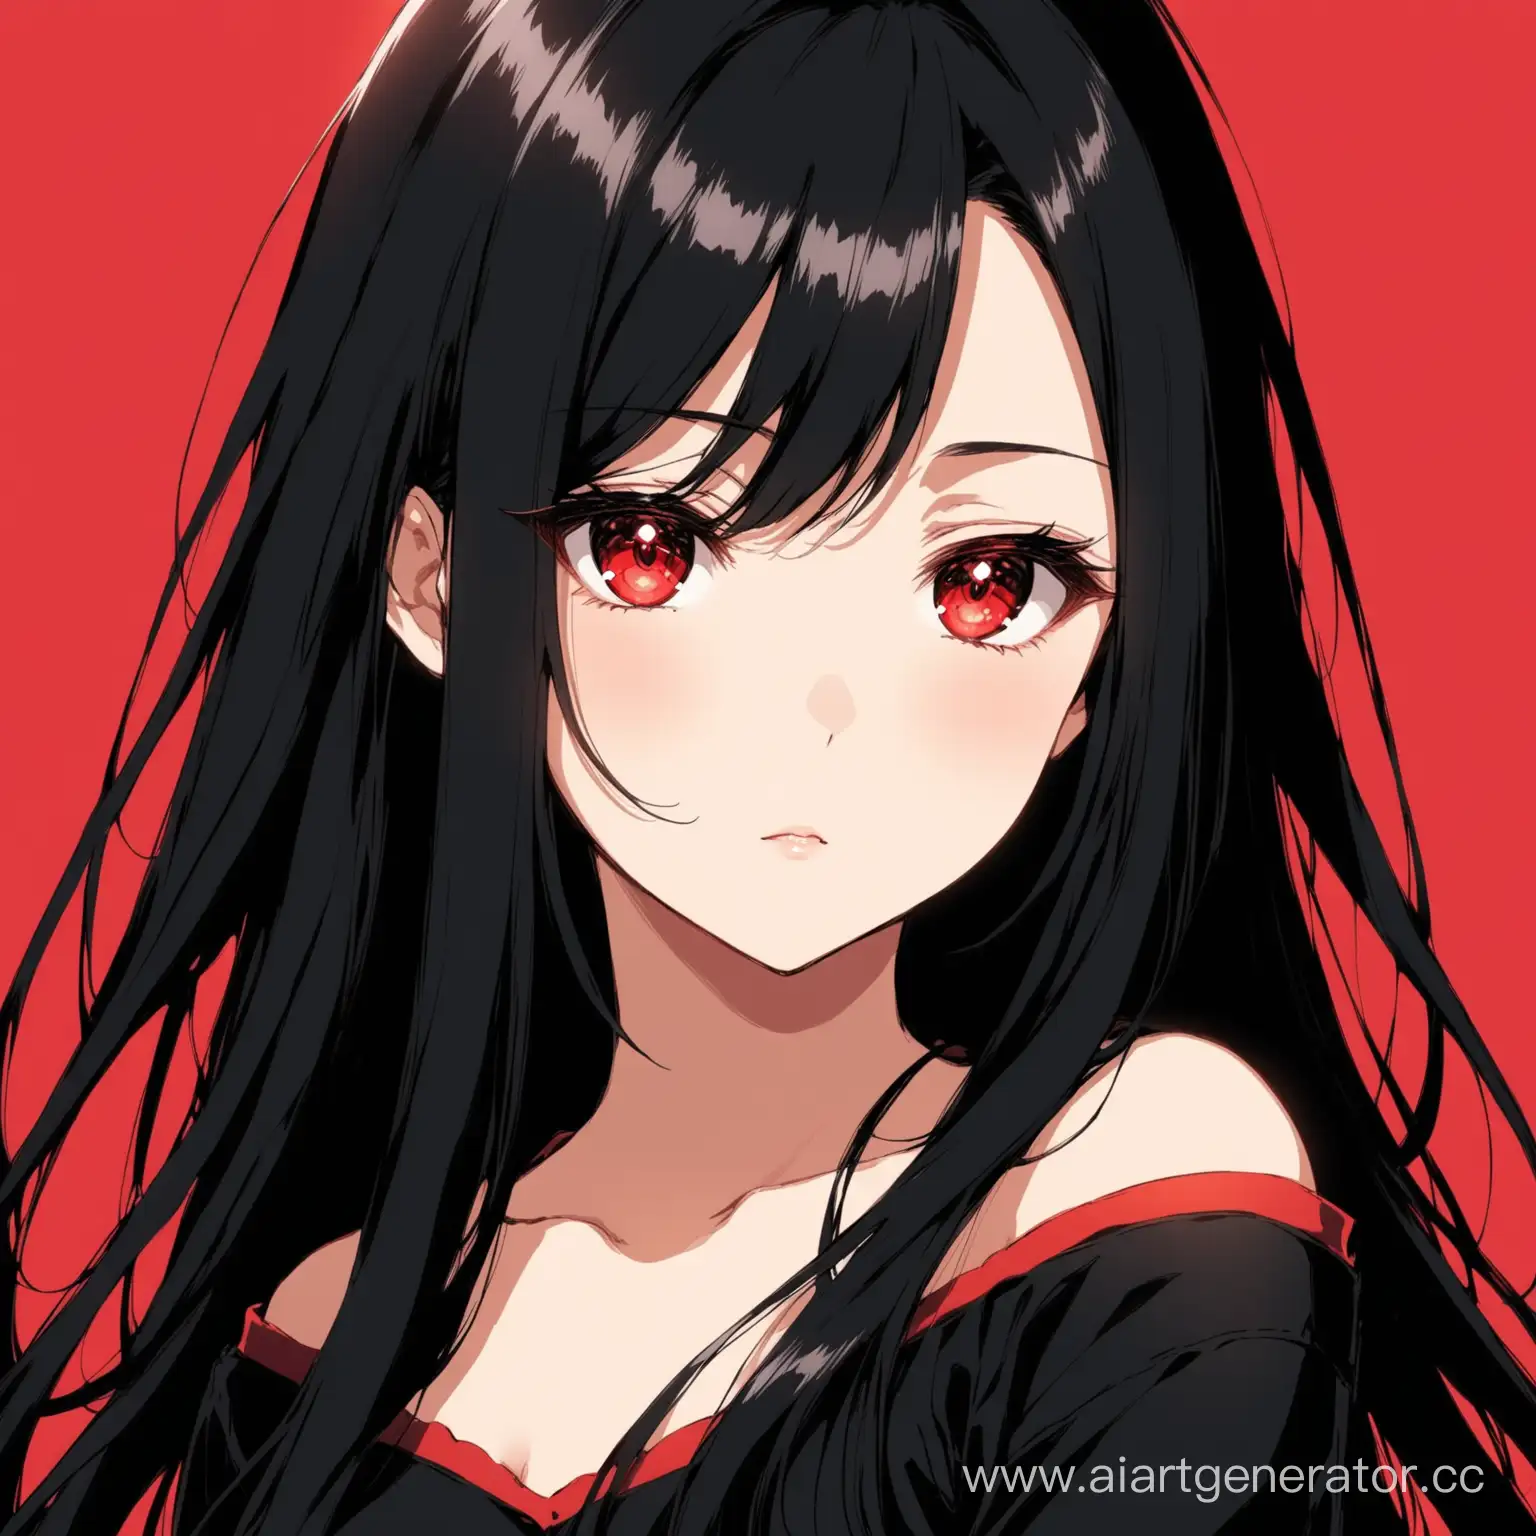 Anime-Girl-with-Long-Black-Hair-and-Red-Eyes-Illustration